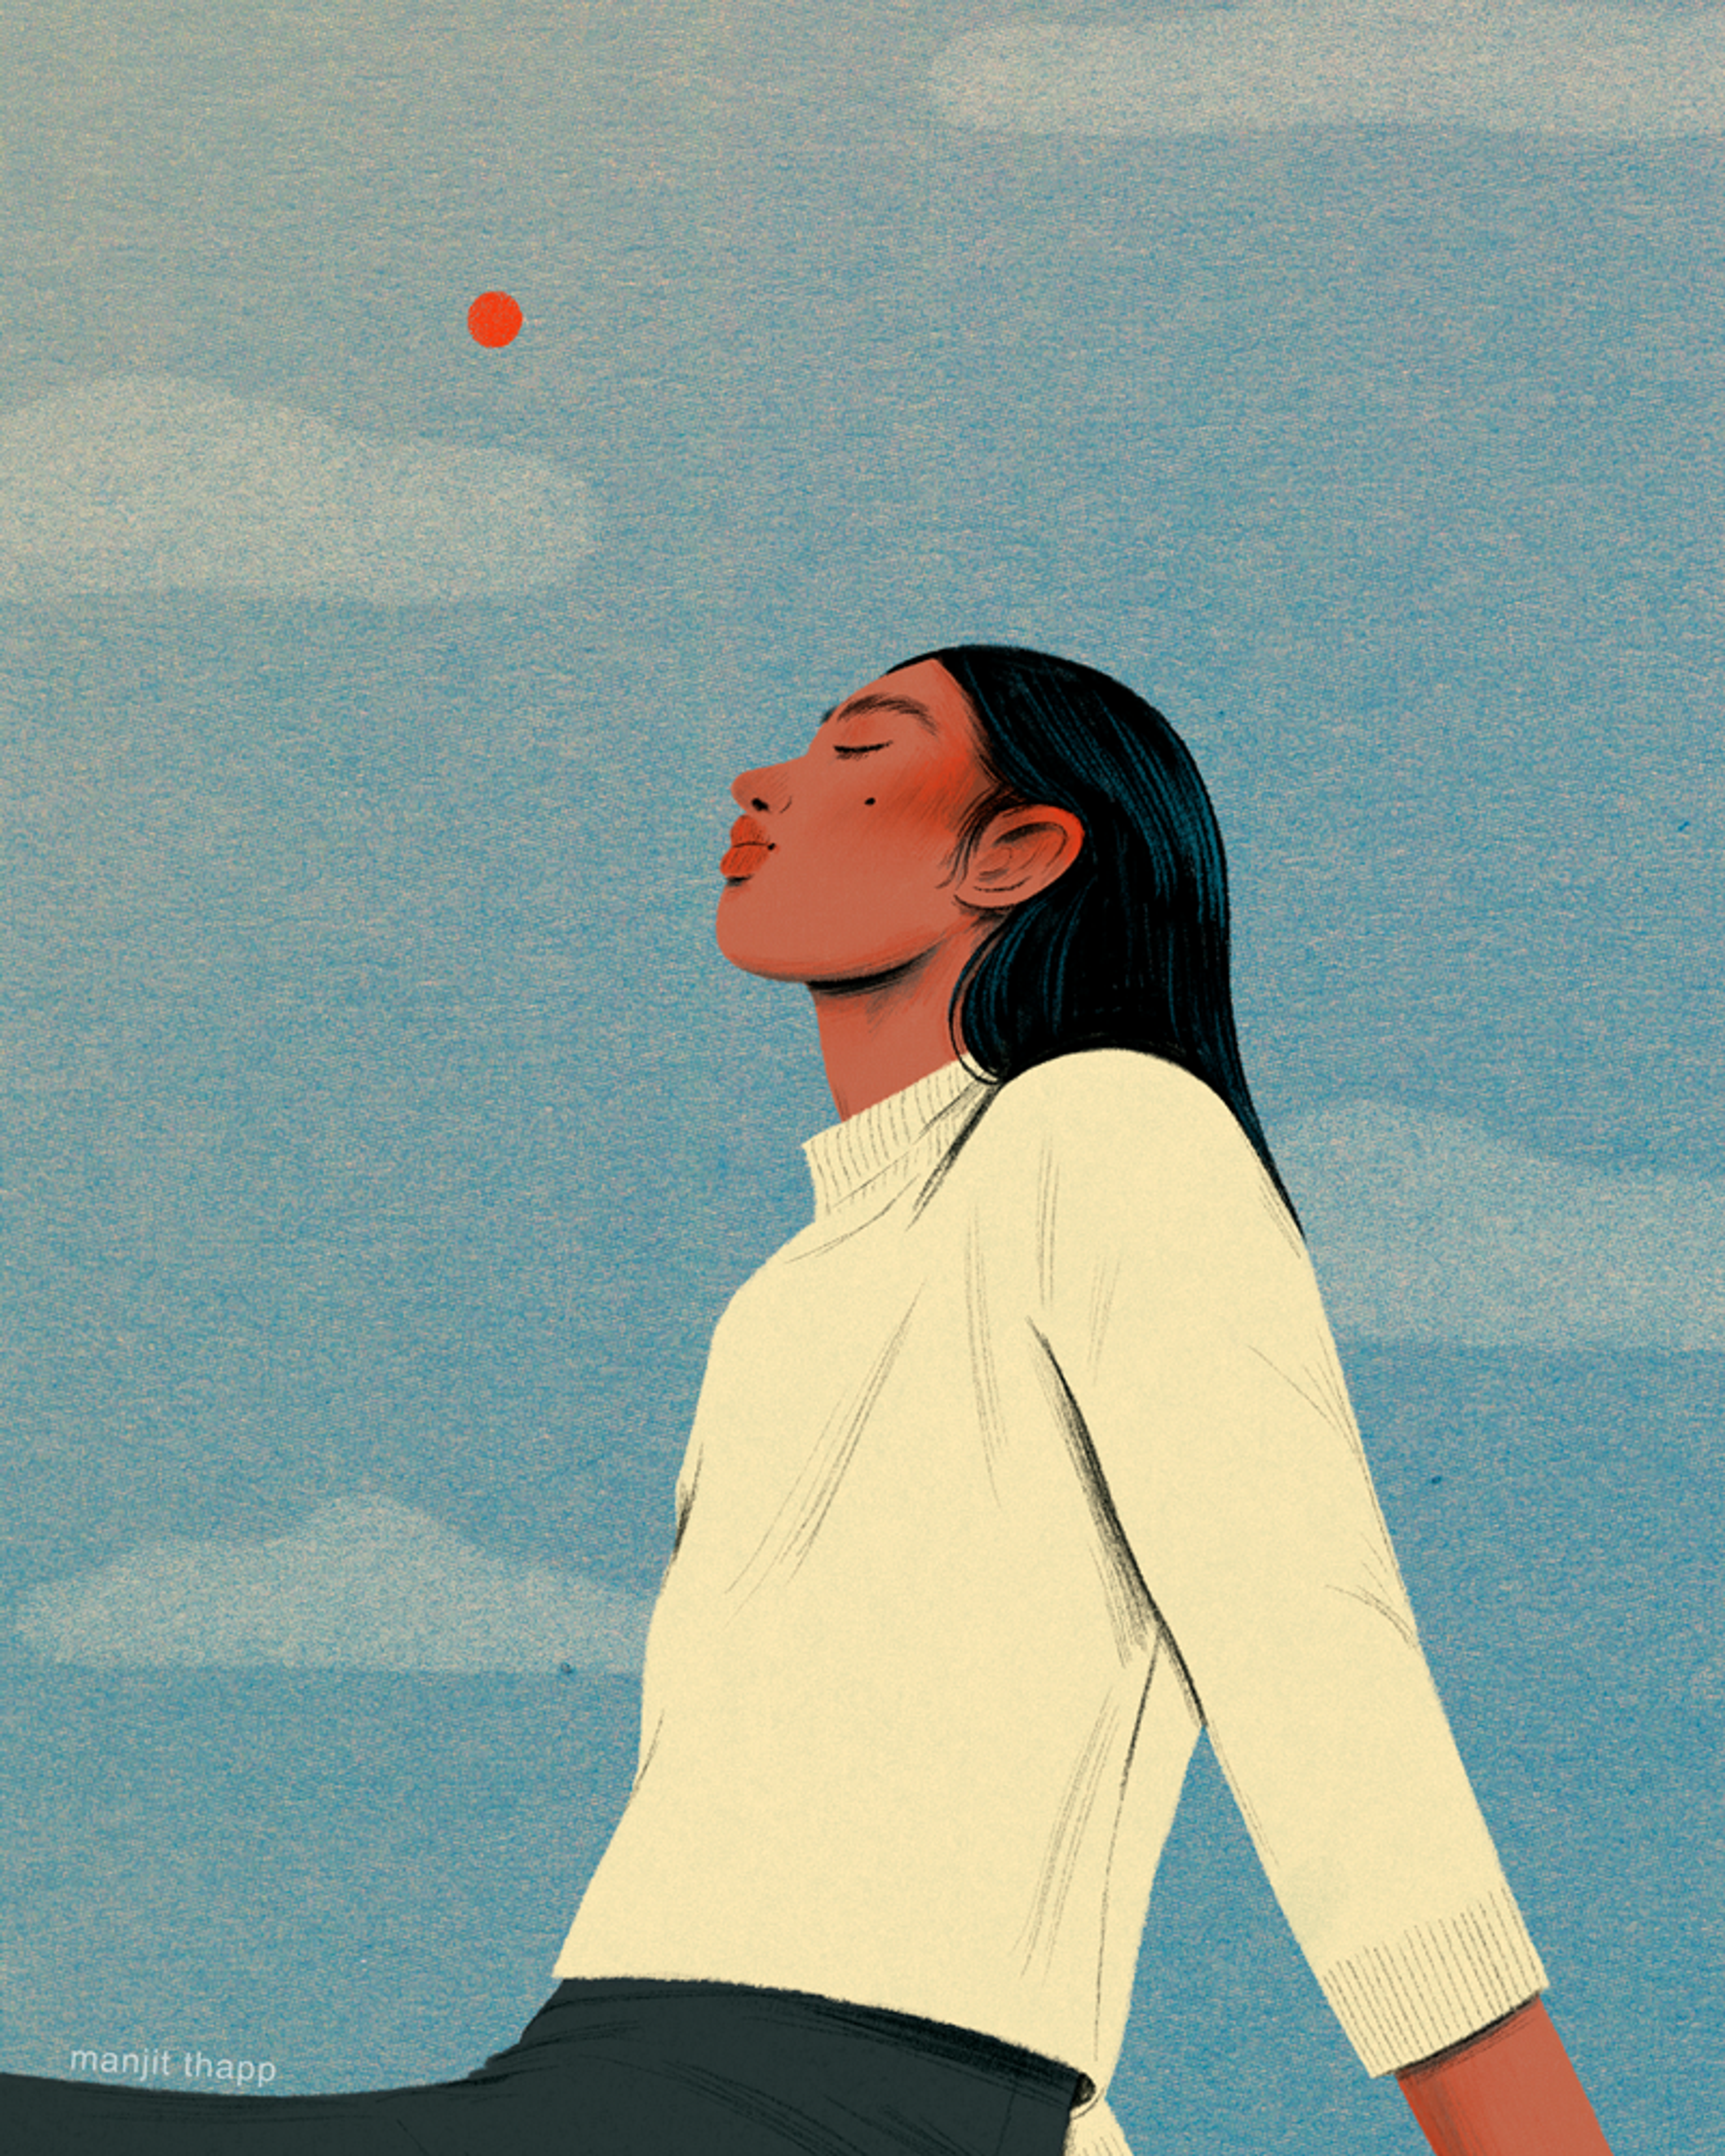 Digital illustration of a girl with dark hair peacefully sitting with her eyes closed against the backdrop of the sky with a small orange sun